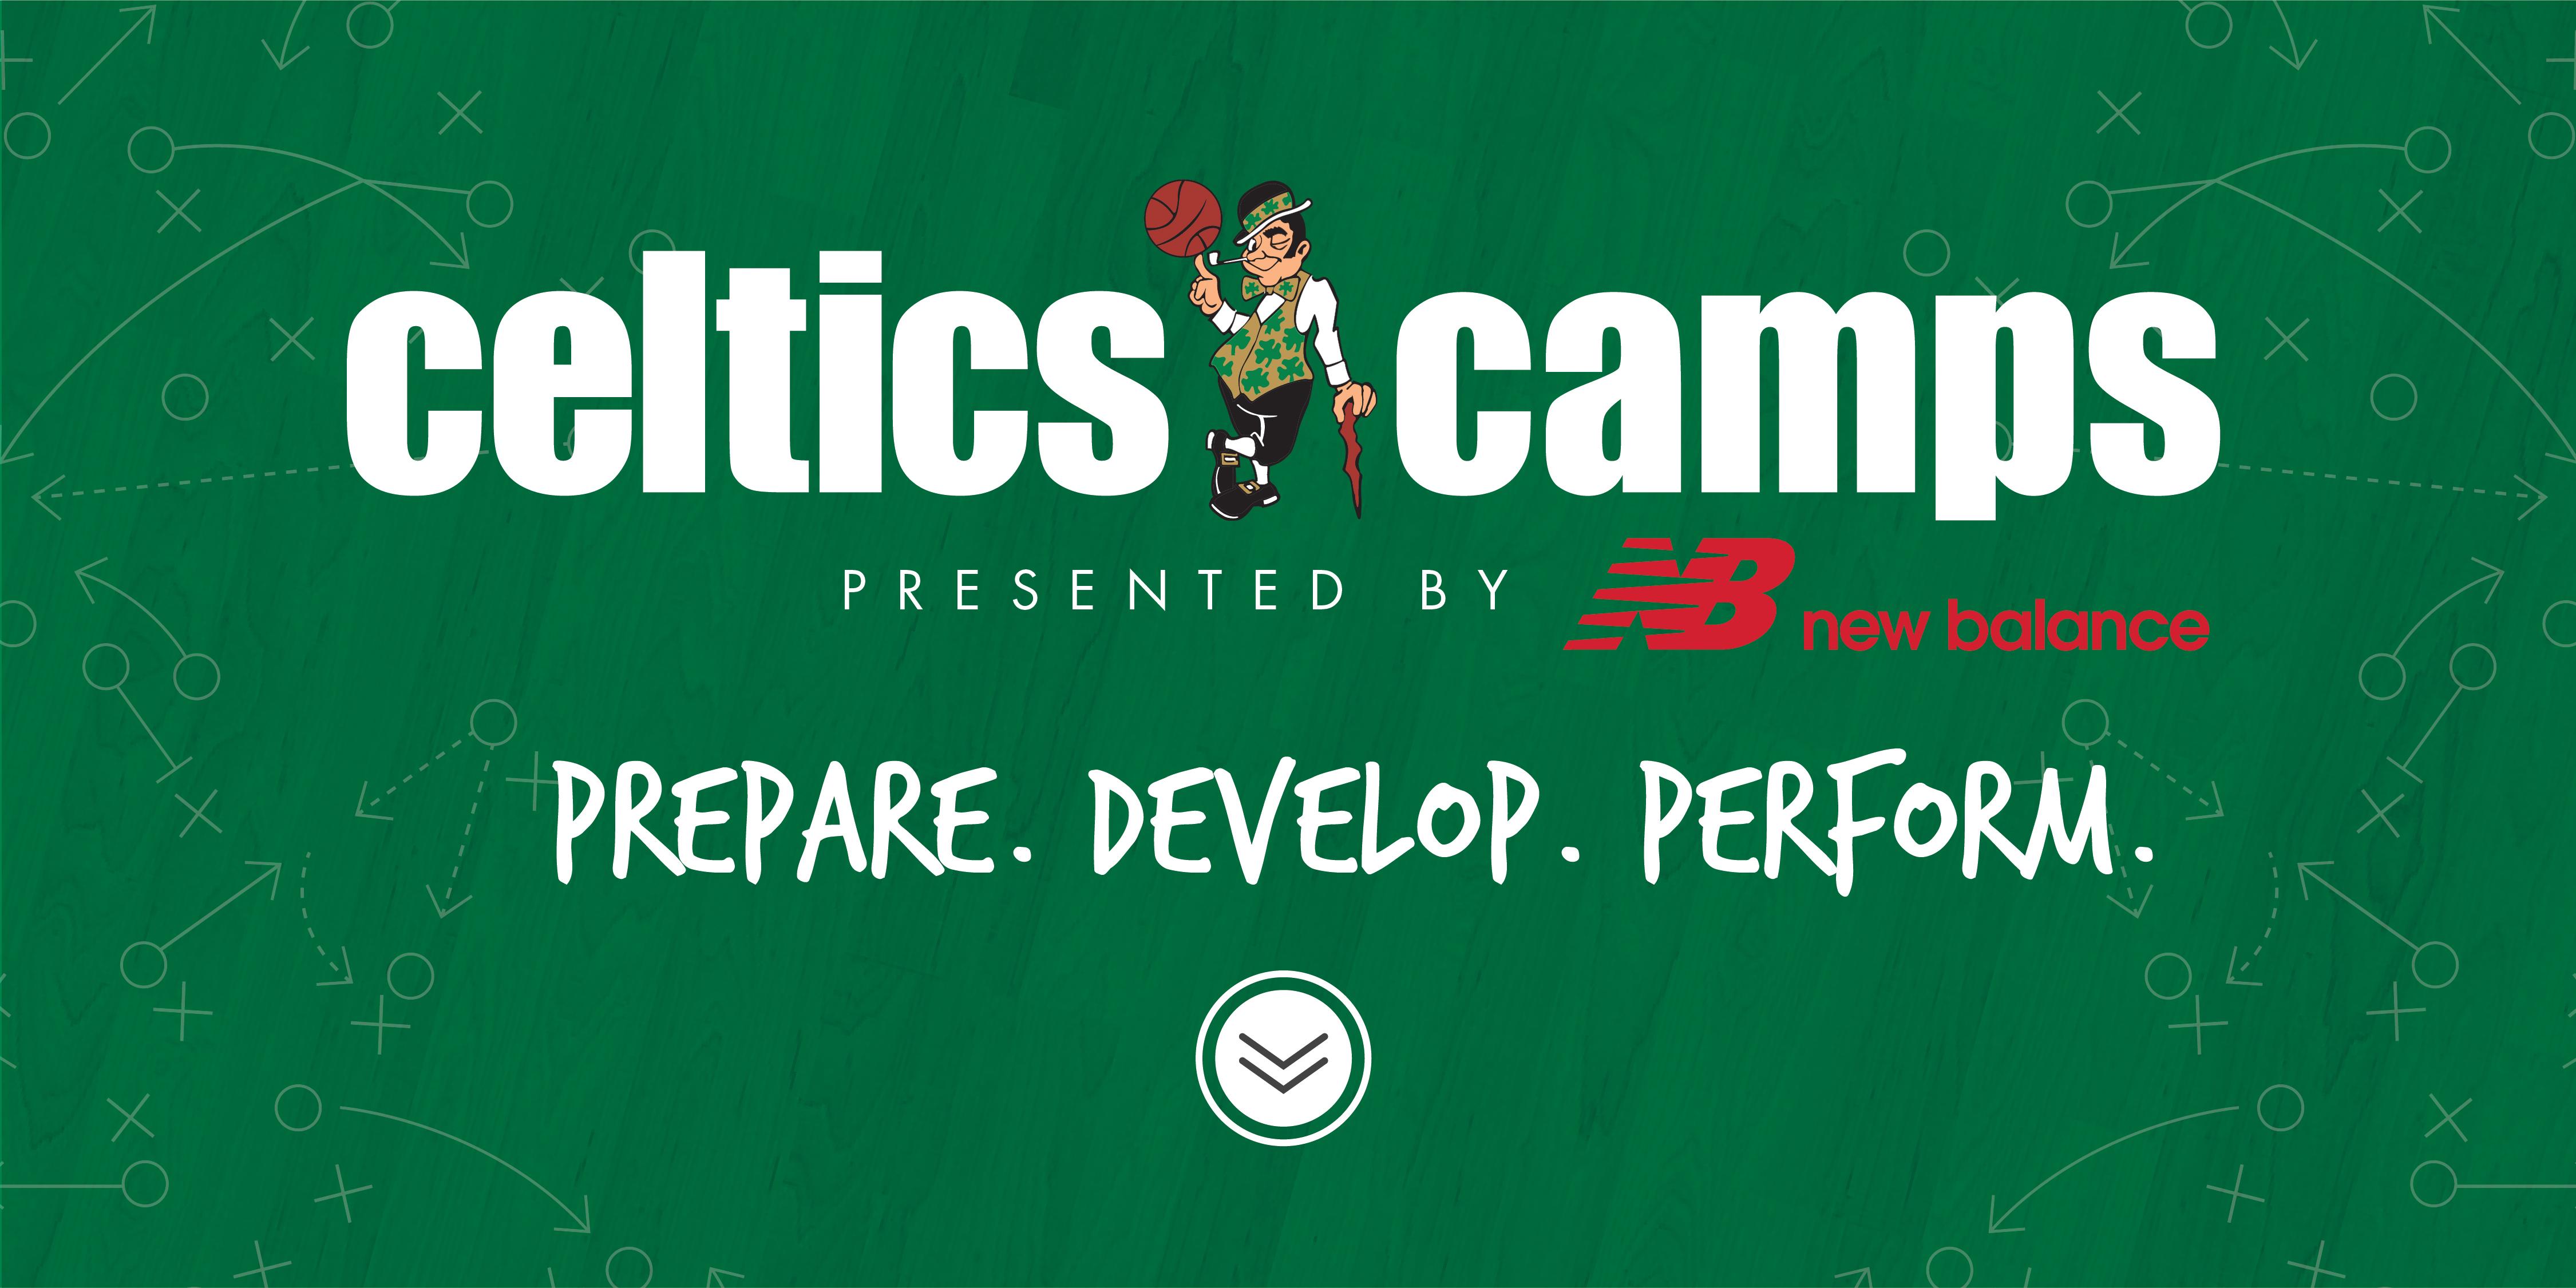 Celtics Camps presented by New Balance (July 13-17 Auerbach Center)